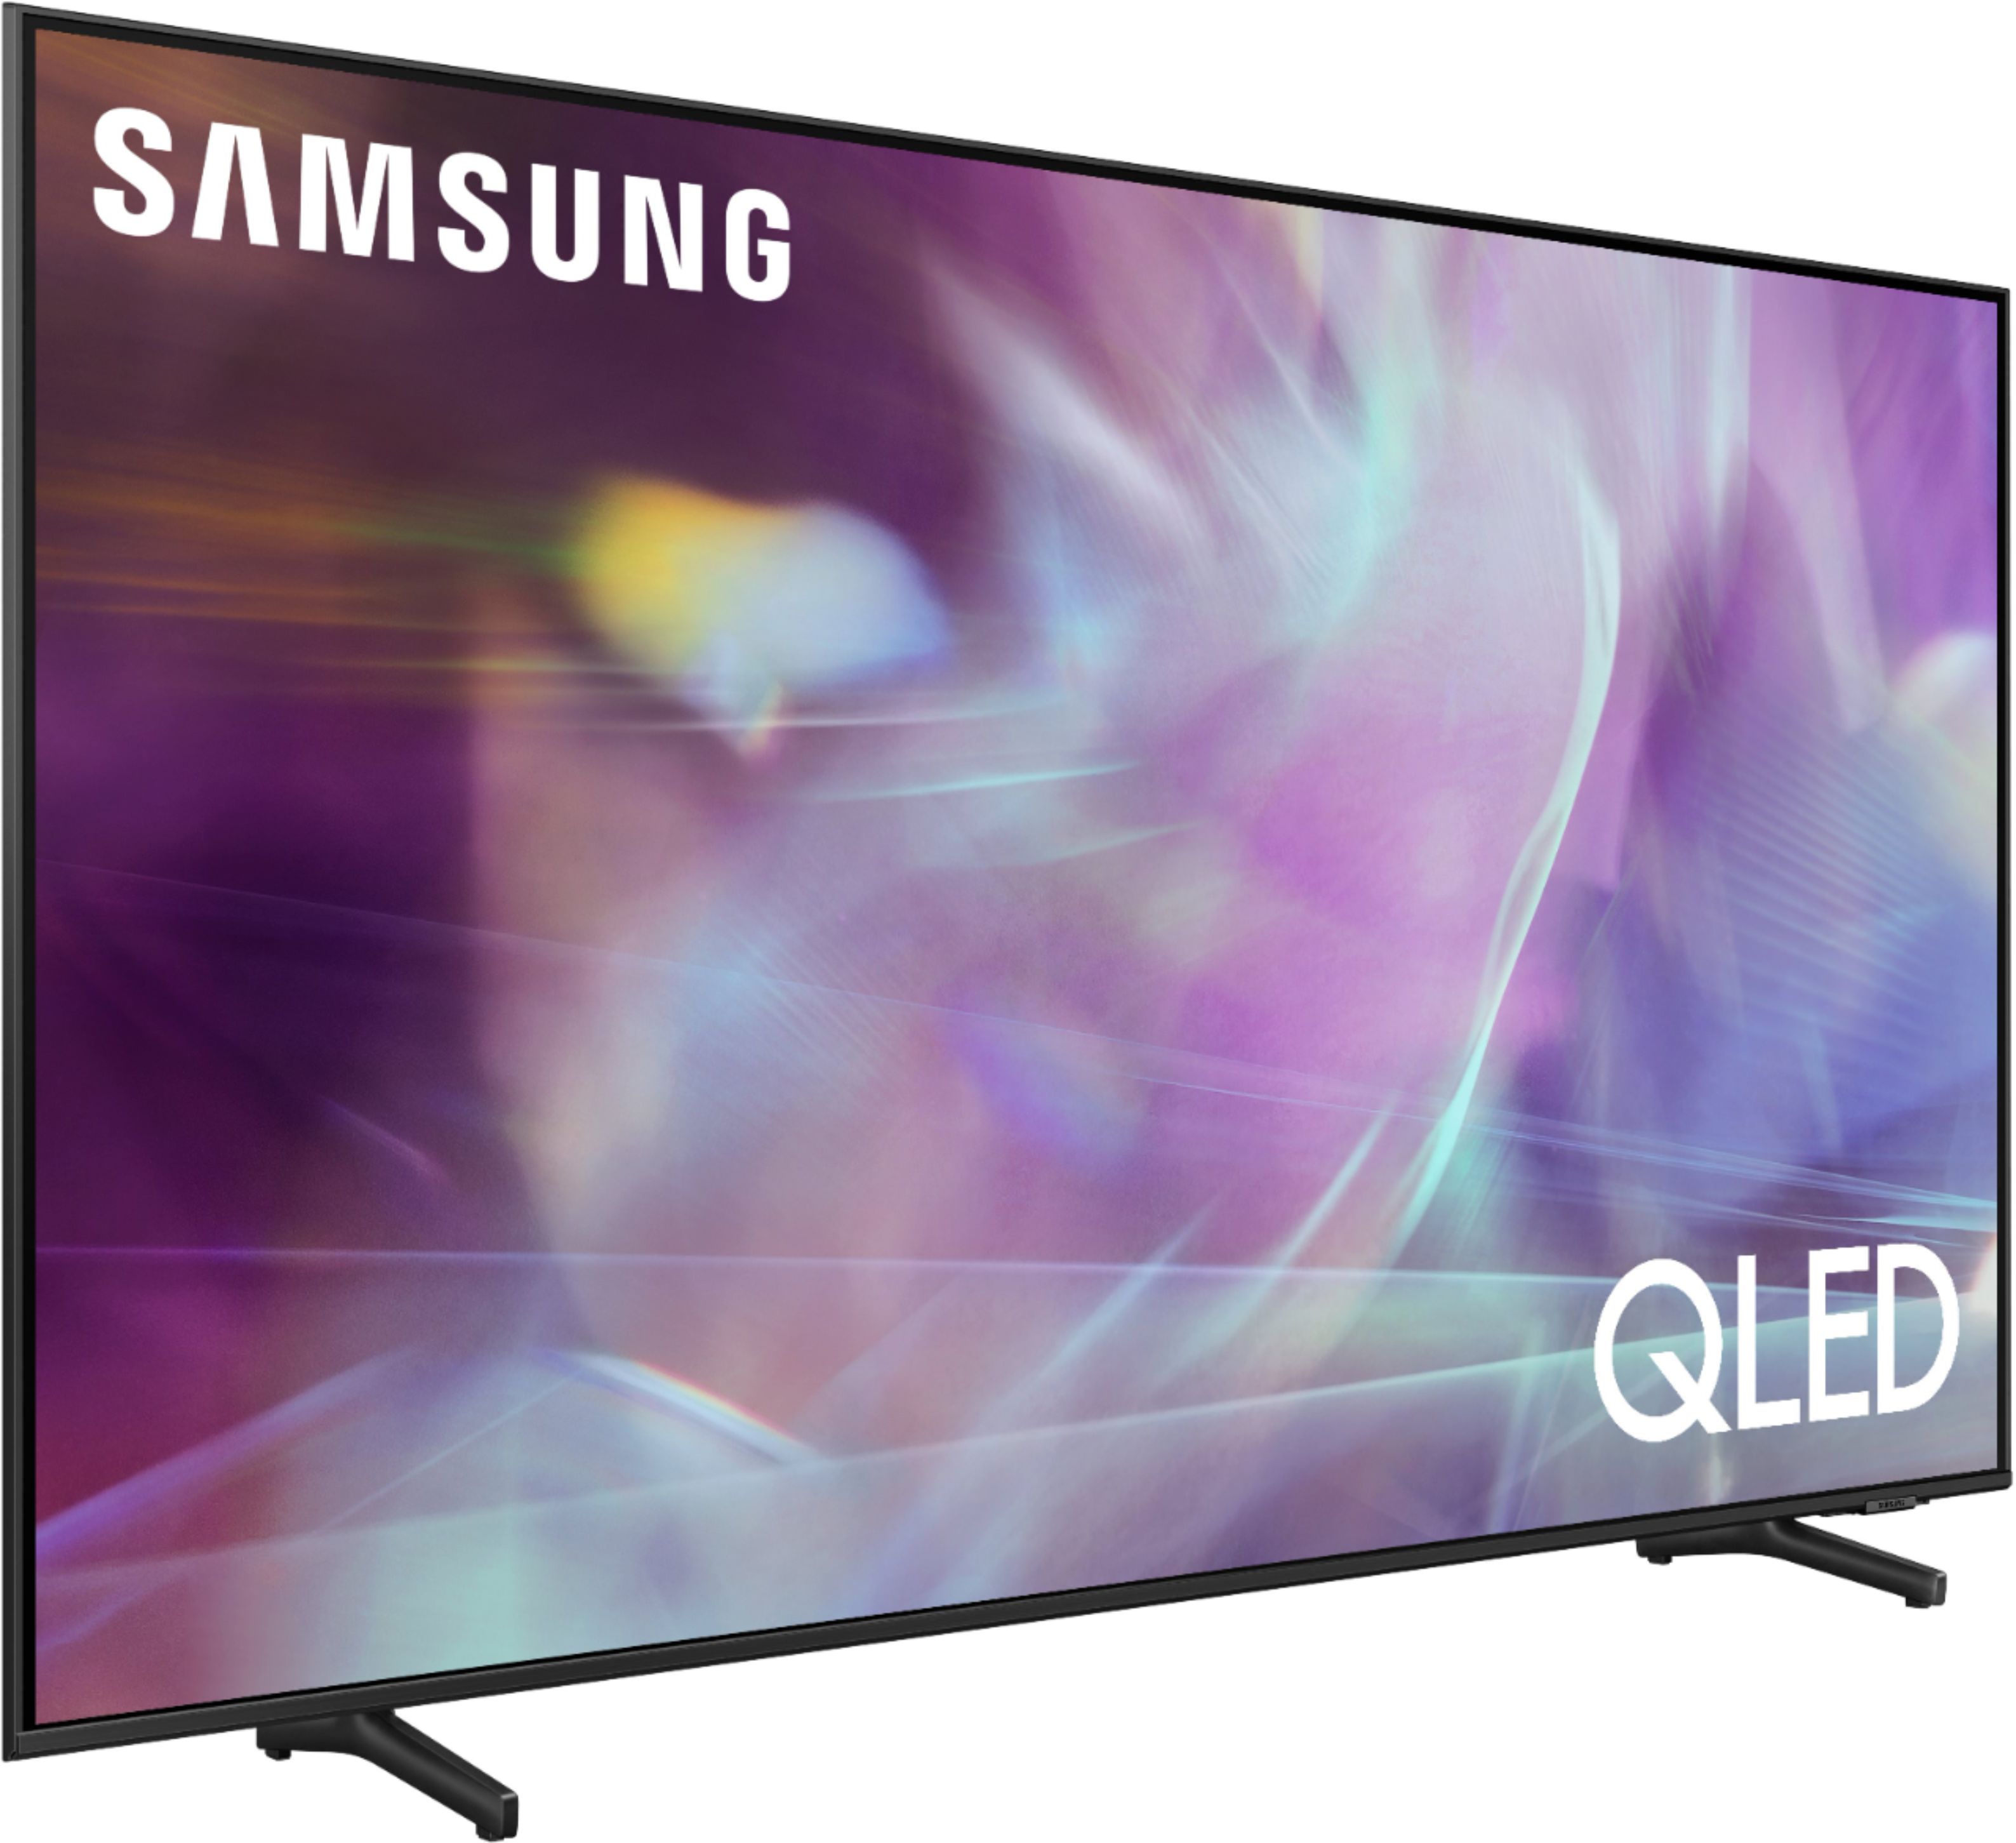 Samsung Makes The Best Smart TVs, And Theyre Still Up To $300 Off On Amazon Today